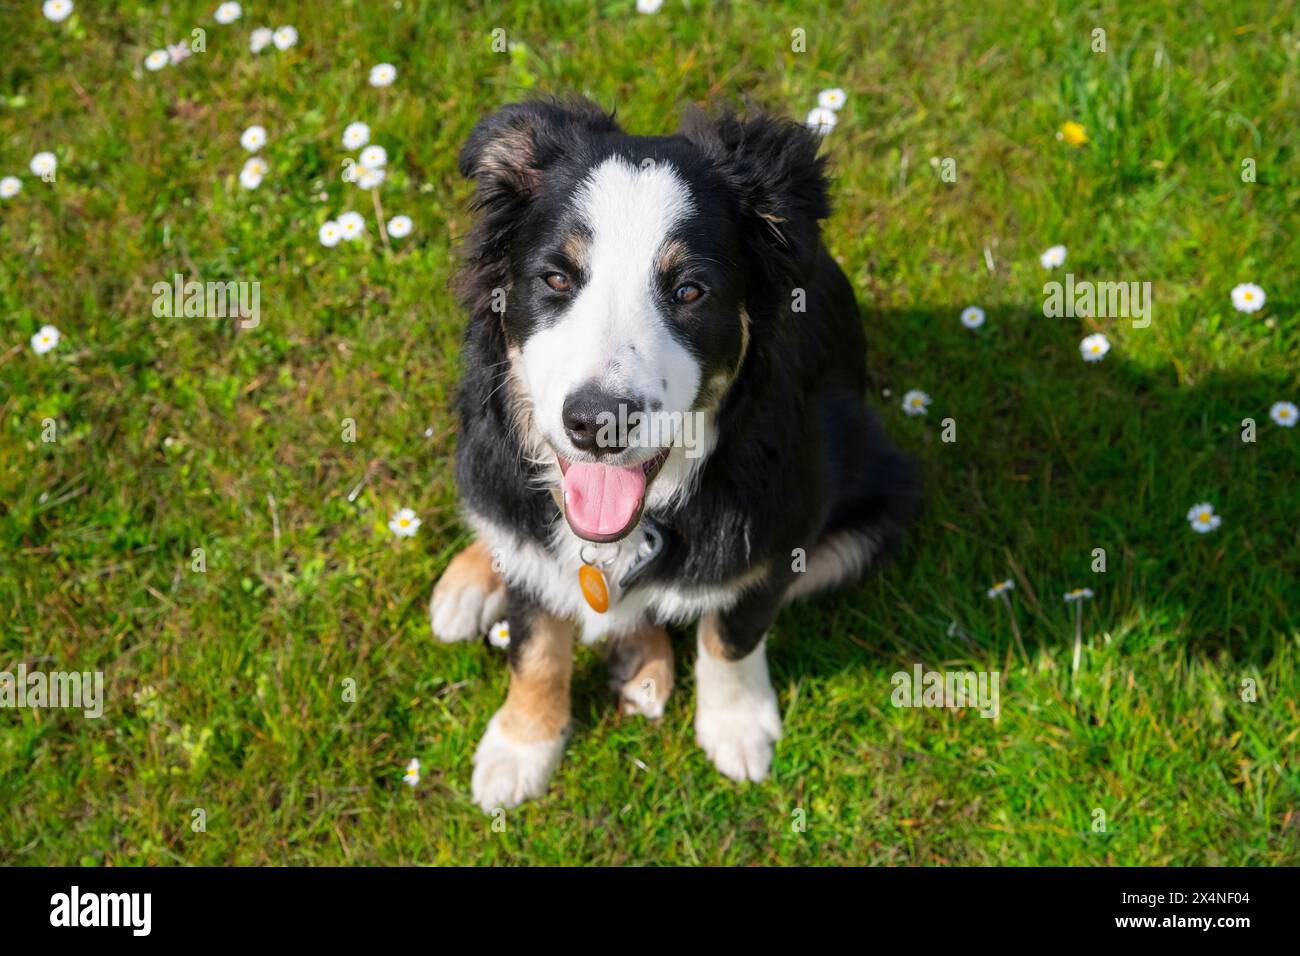 Cute little Border Collie puppy sat on grass surrounded by daisies and looking up at his owner. Stock Photo